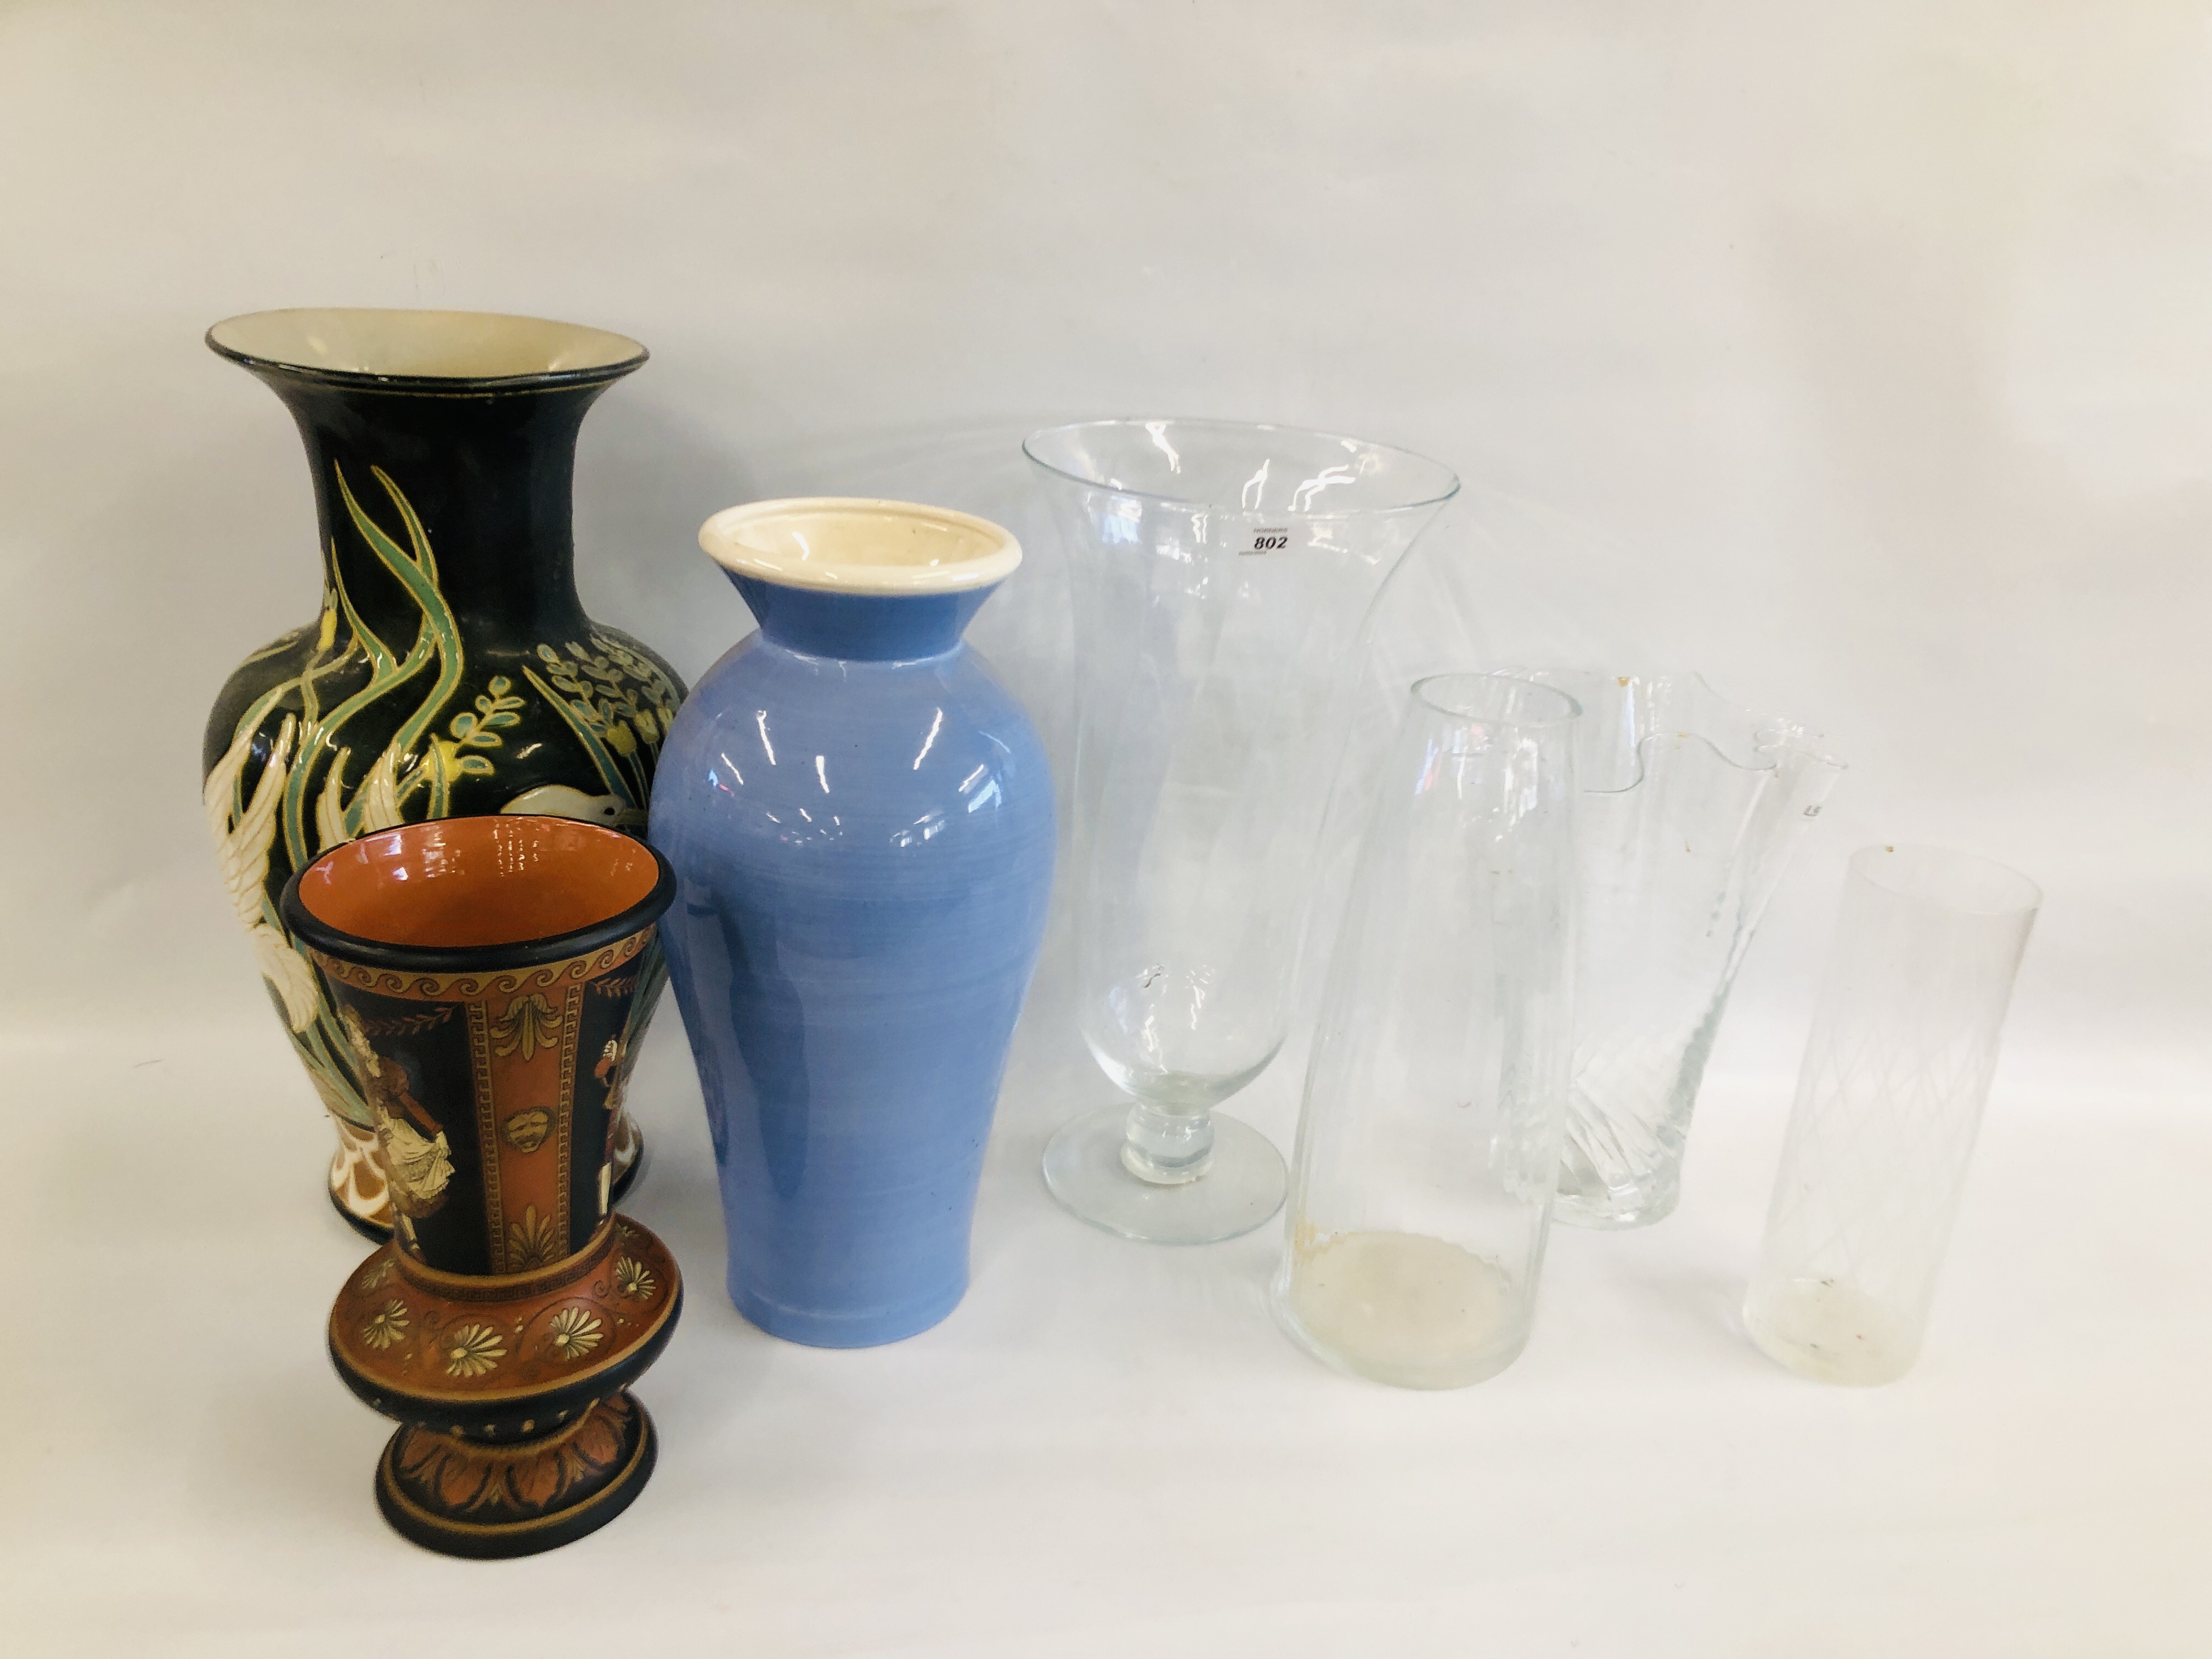 A COLLECTION OF 7 VARIOUS VASES INCLUDING GLASS HANDKERCHIEF STYLE, BLUE GLAZED, SWAN DESIGN ETC.